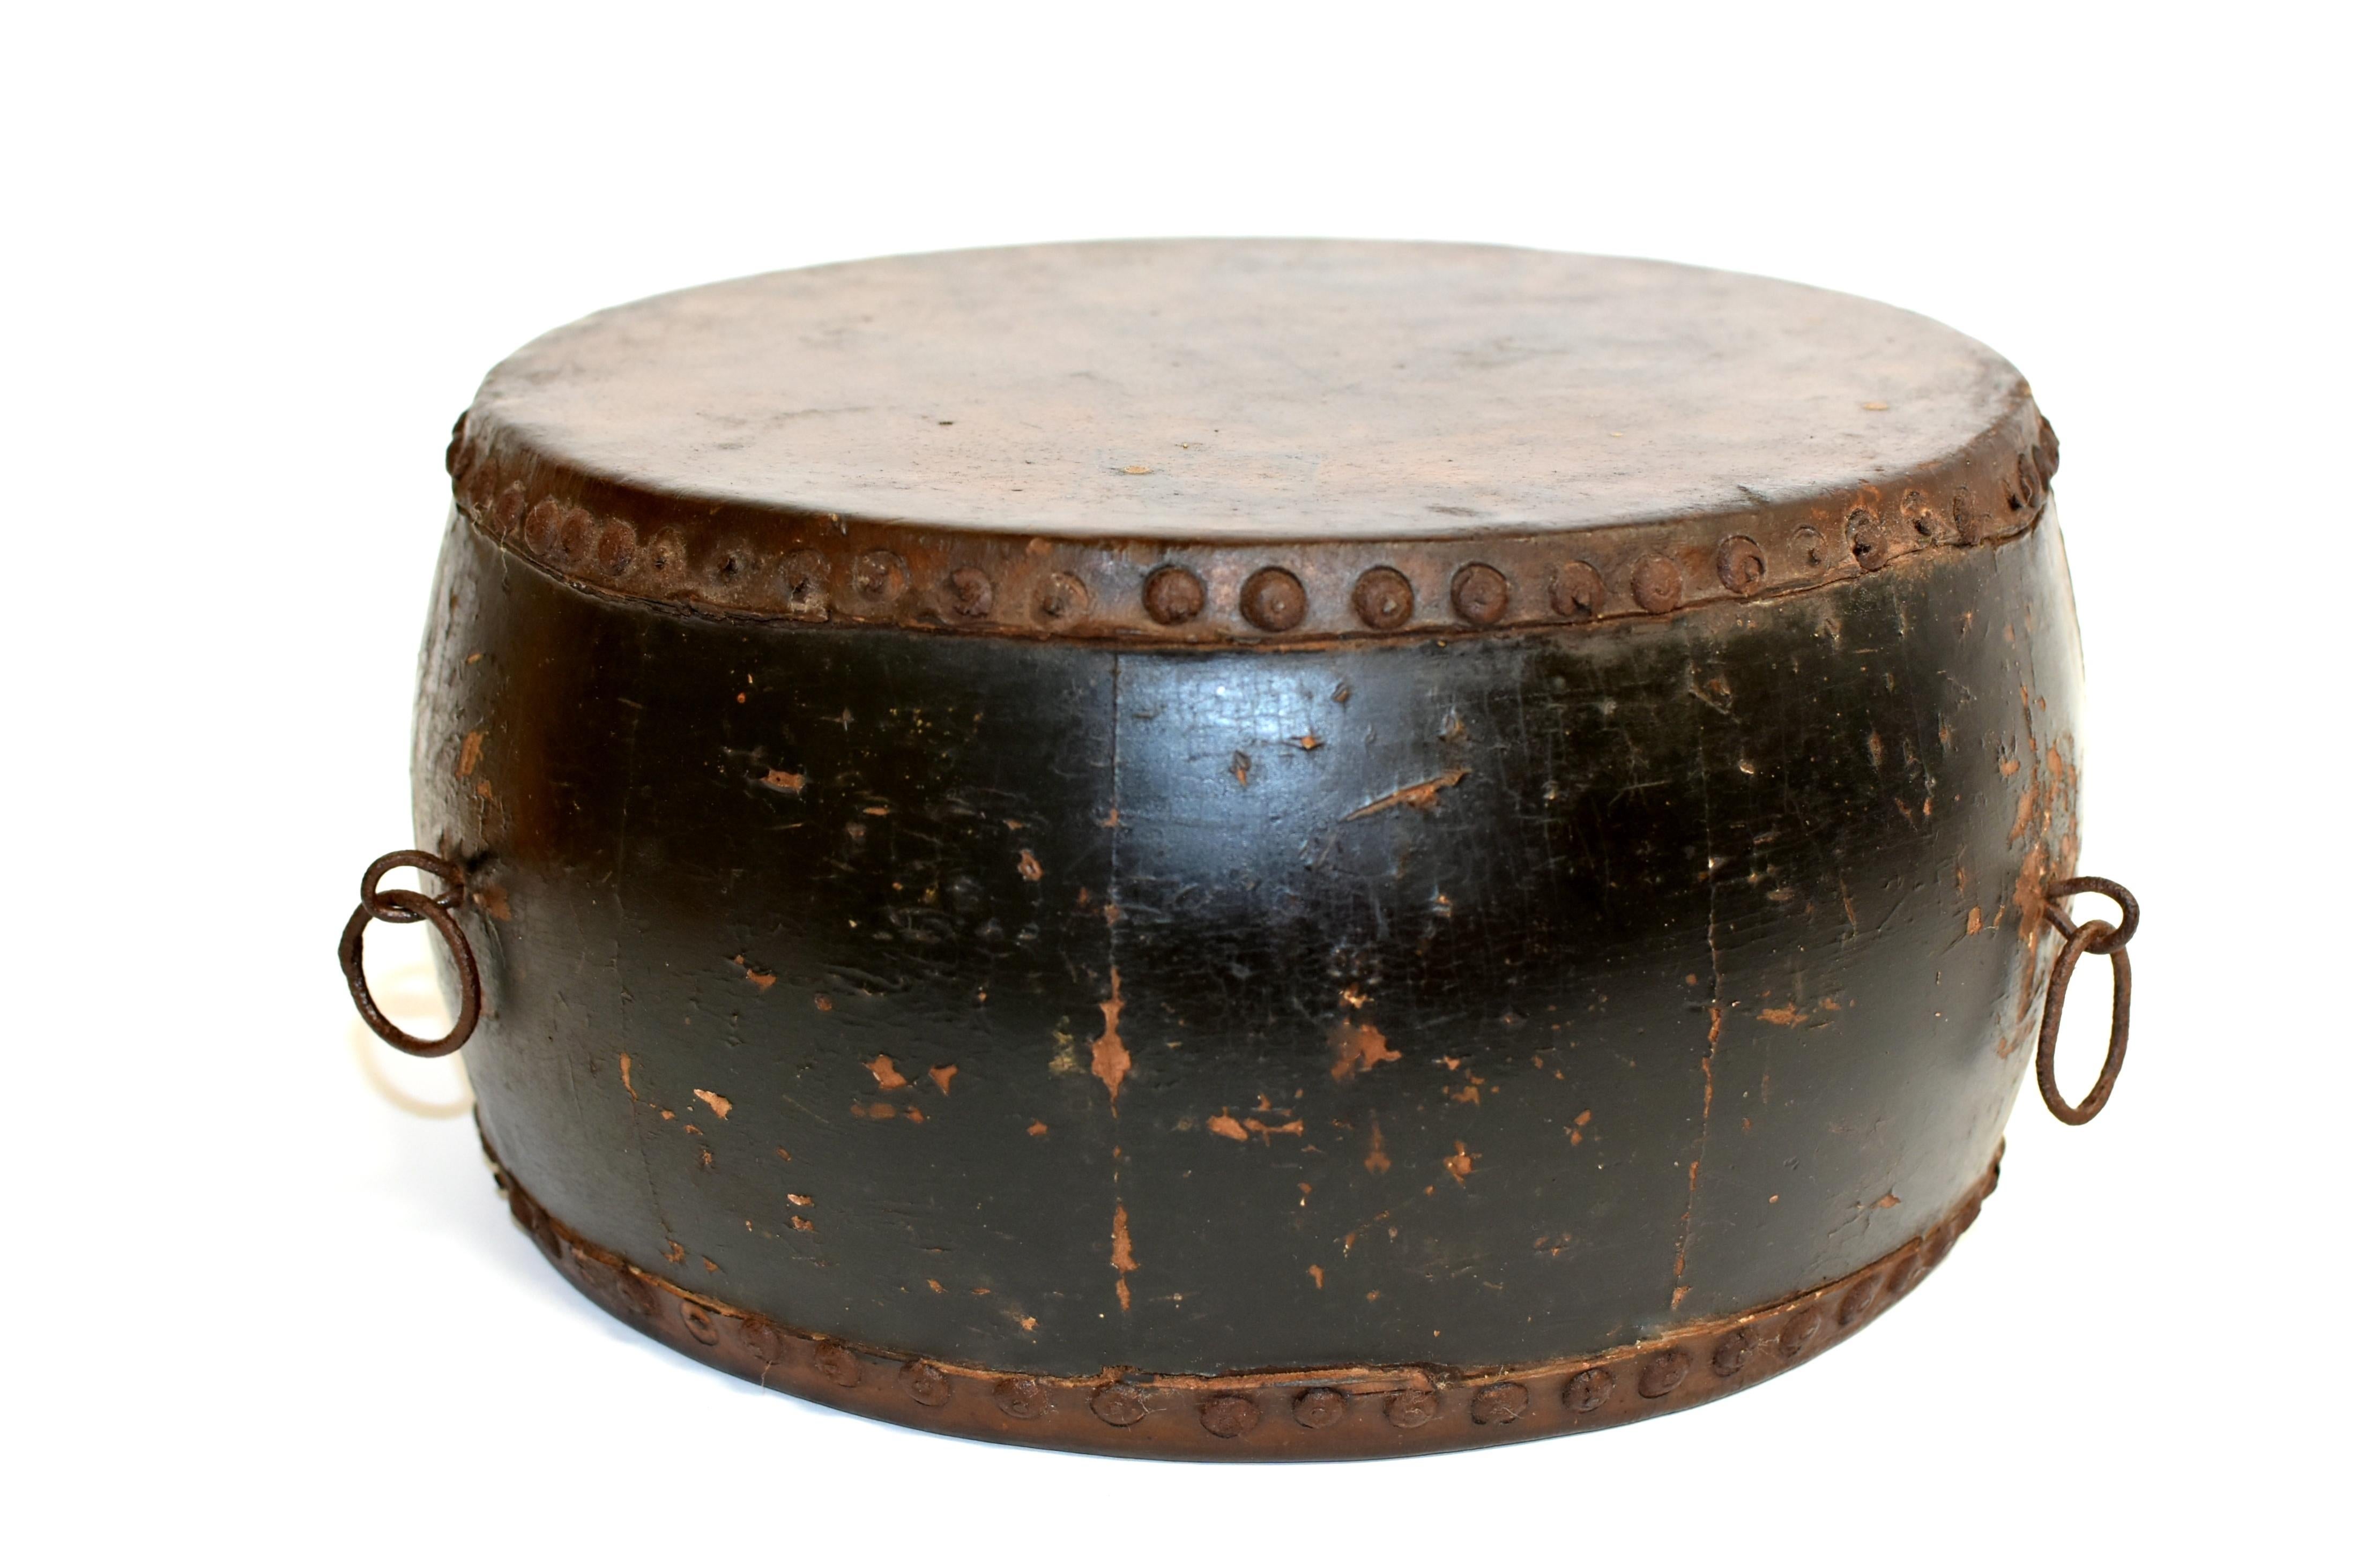 A beautiful old drum with stamps of Wealth God on both sides and maker's mark dating back to later 19th century. All original leather, iron nails and rings. This drum is the perfect size to be used on a table or a bookshelf. Great as a drum, as a